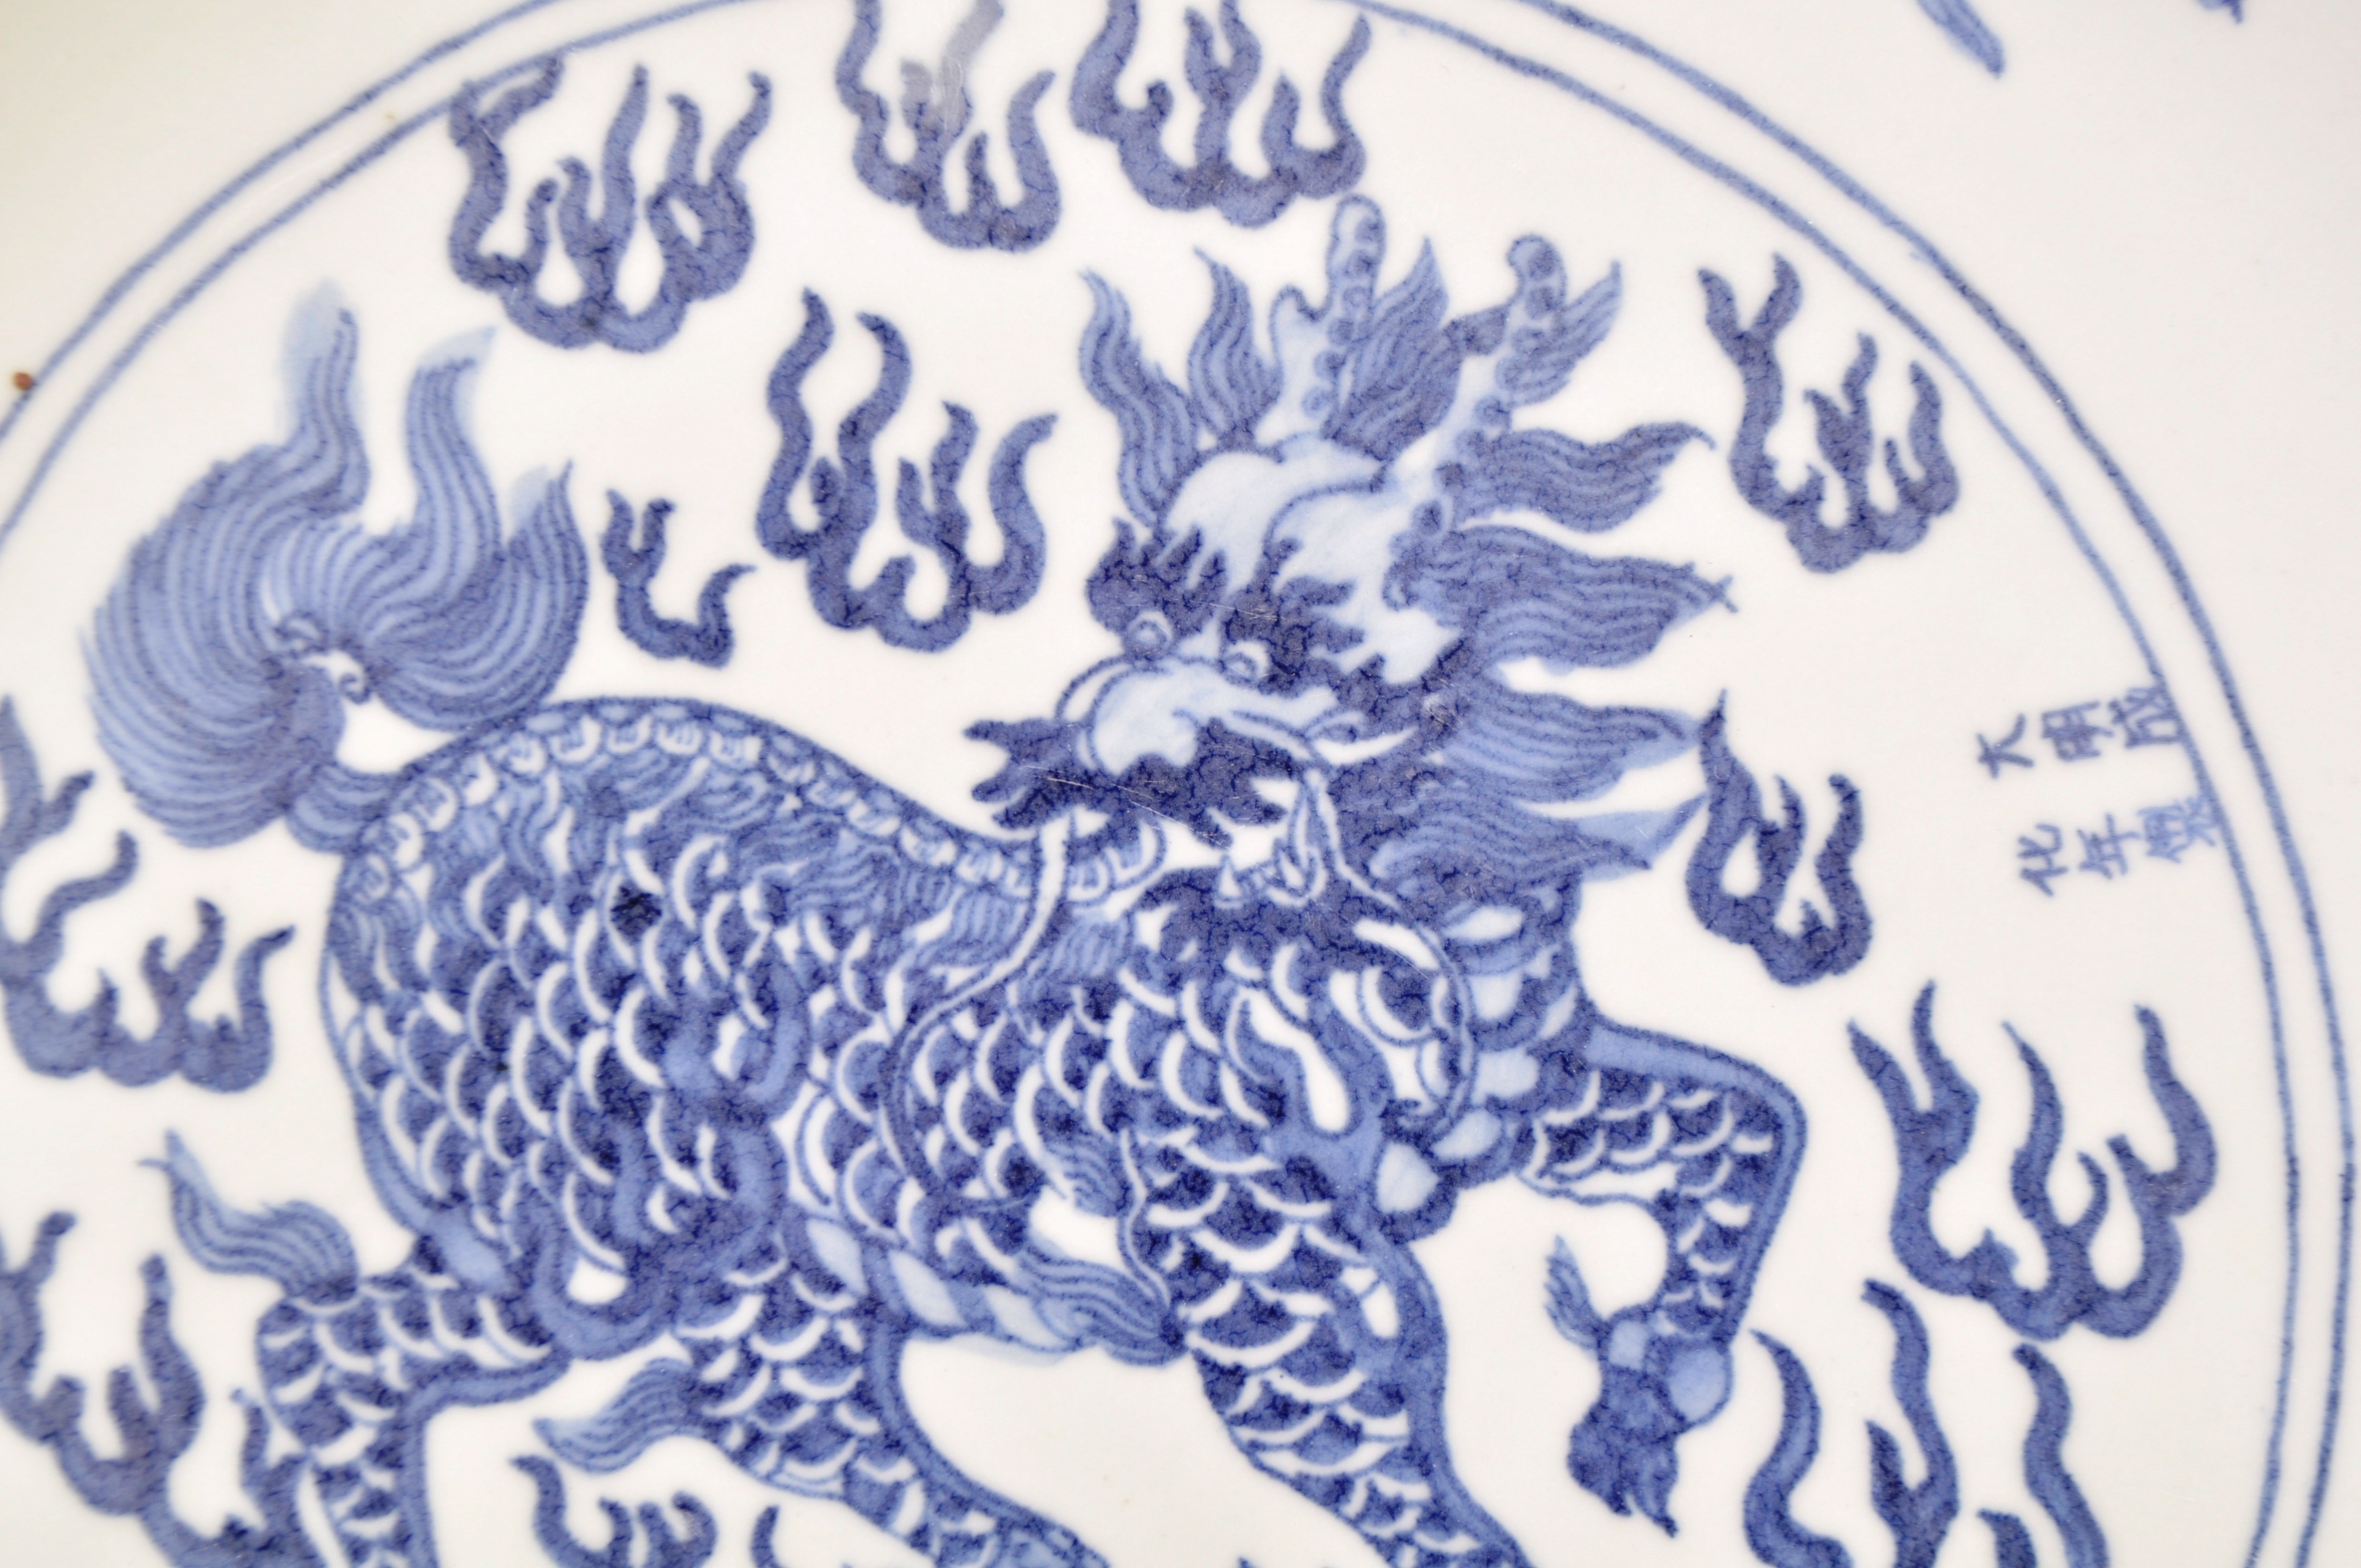 CHINESE CHENGHUA MARK BLUE AND WHITE LARGE 17" CHARGER - Image 3 of 6